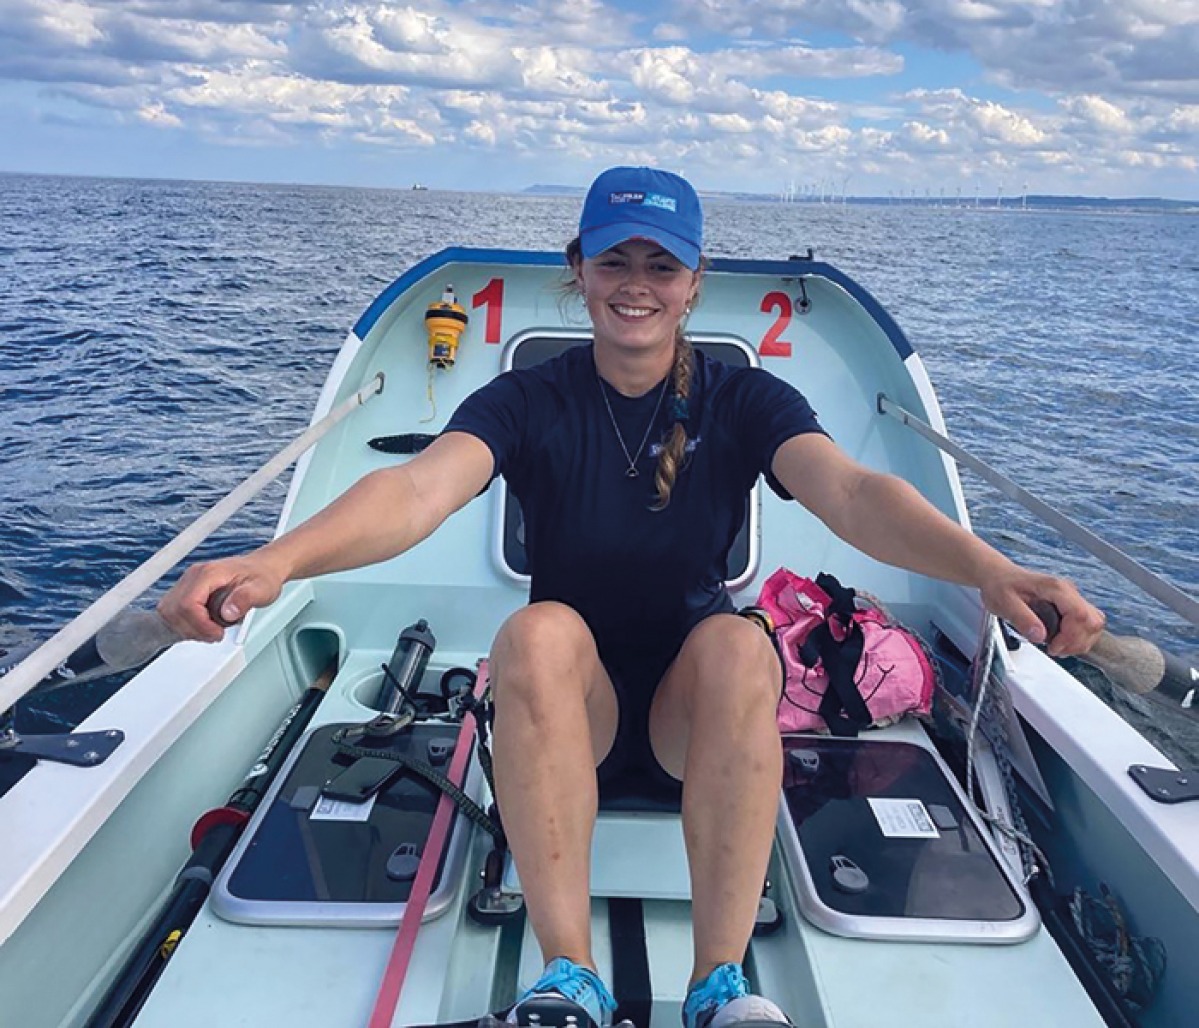 Why Miriam Payne from Yorkshire is Solo Rowing Across the Atlantic ...